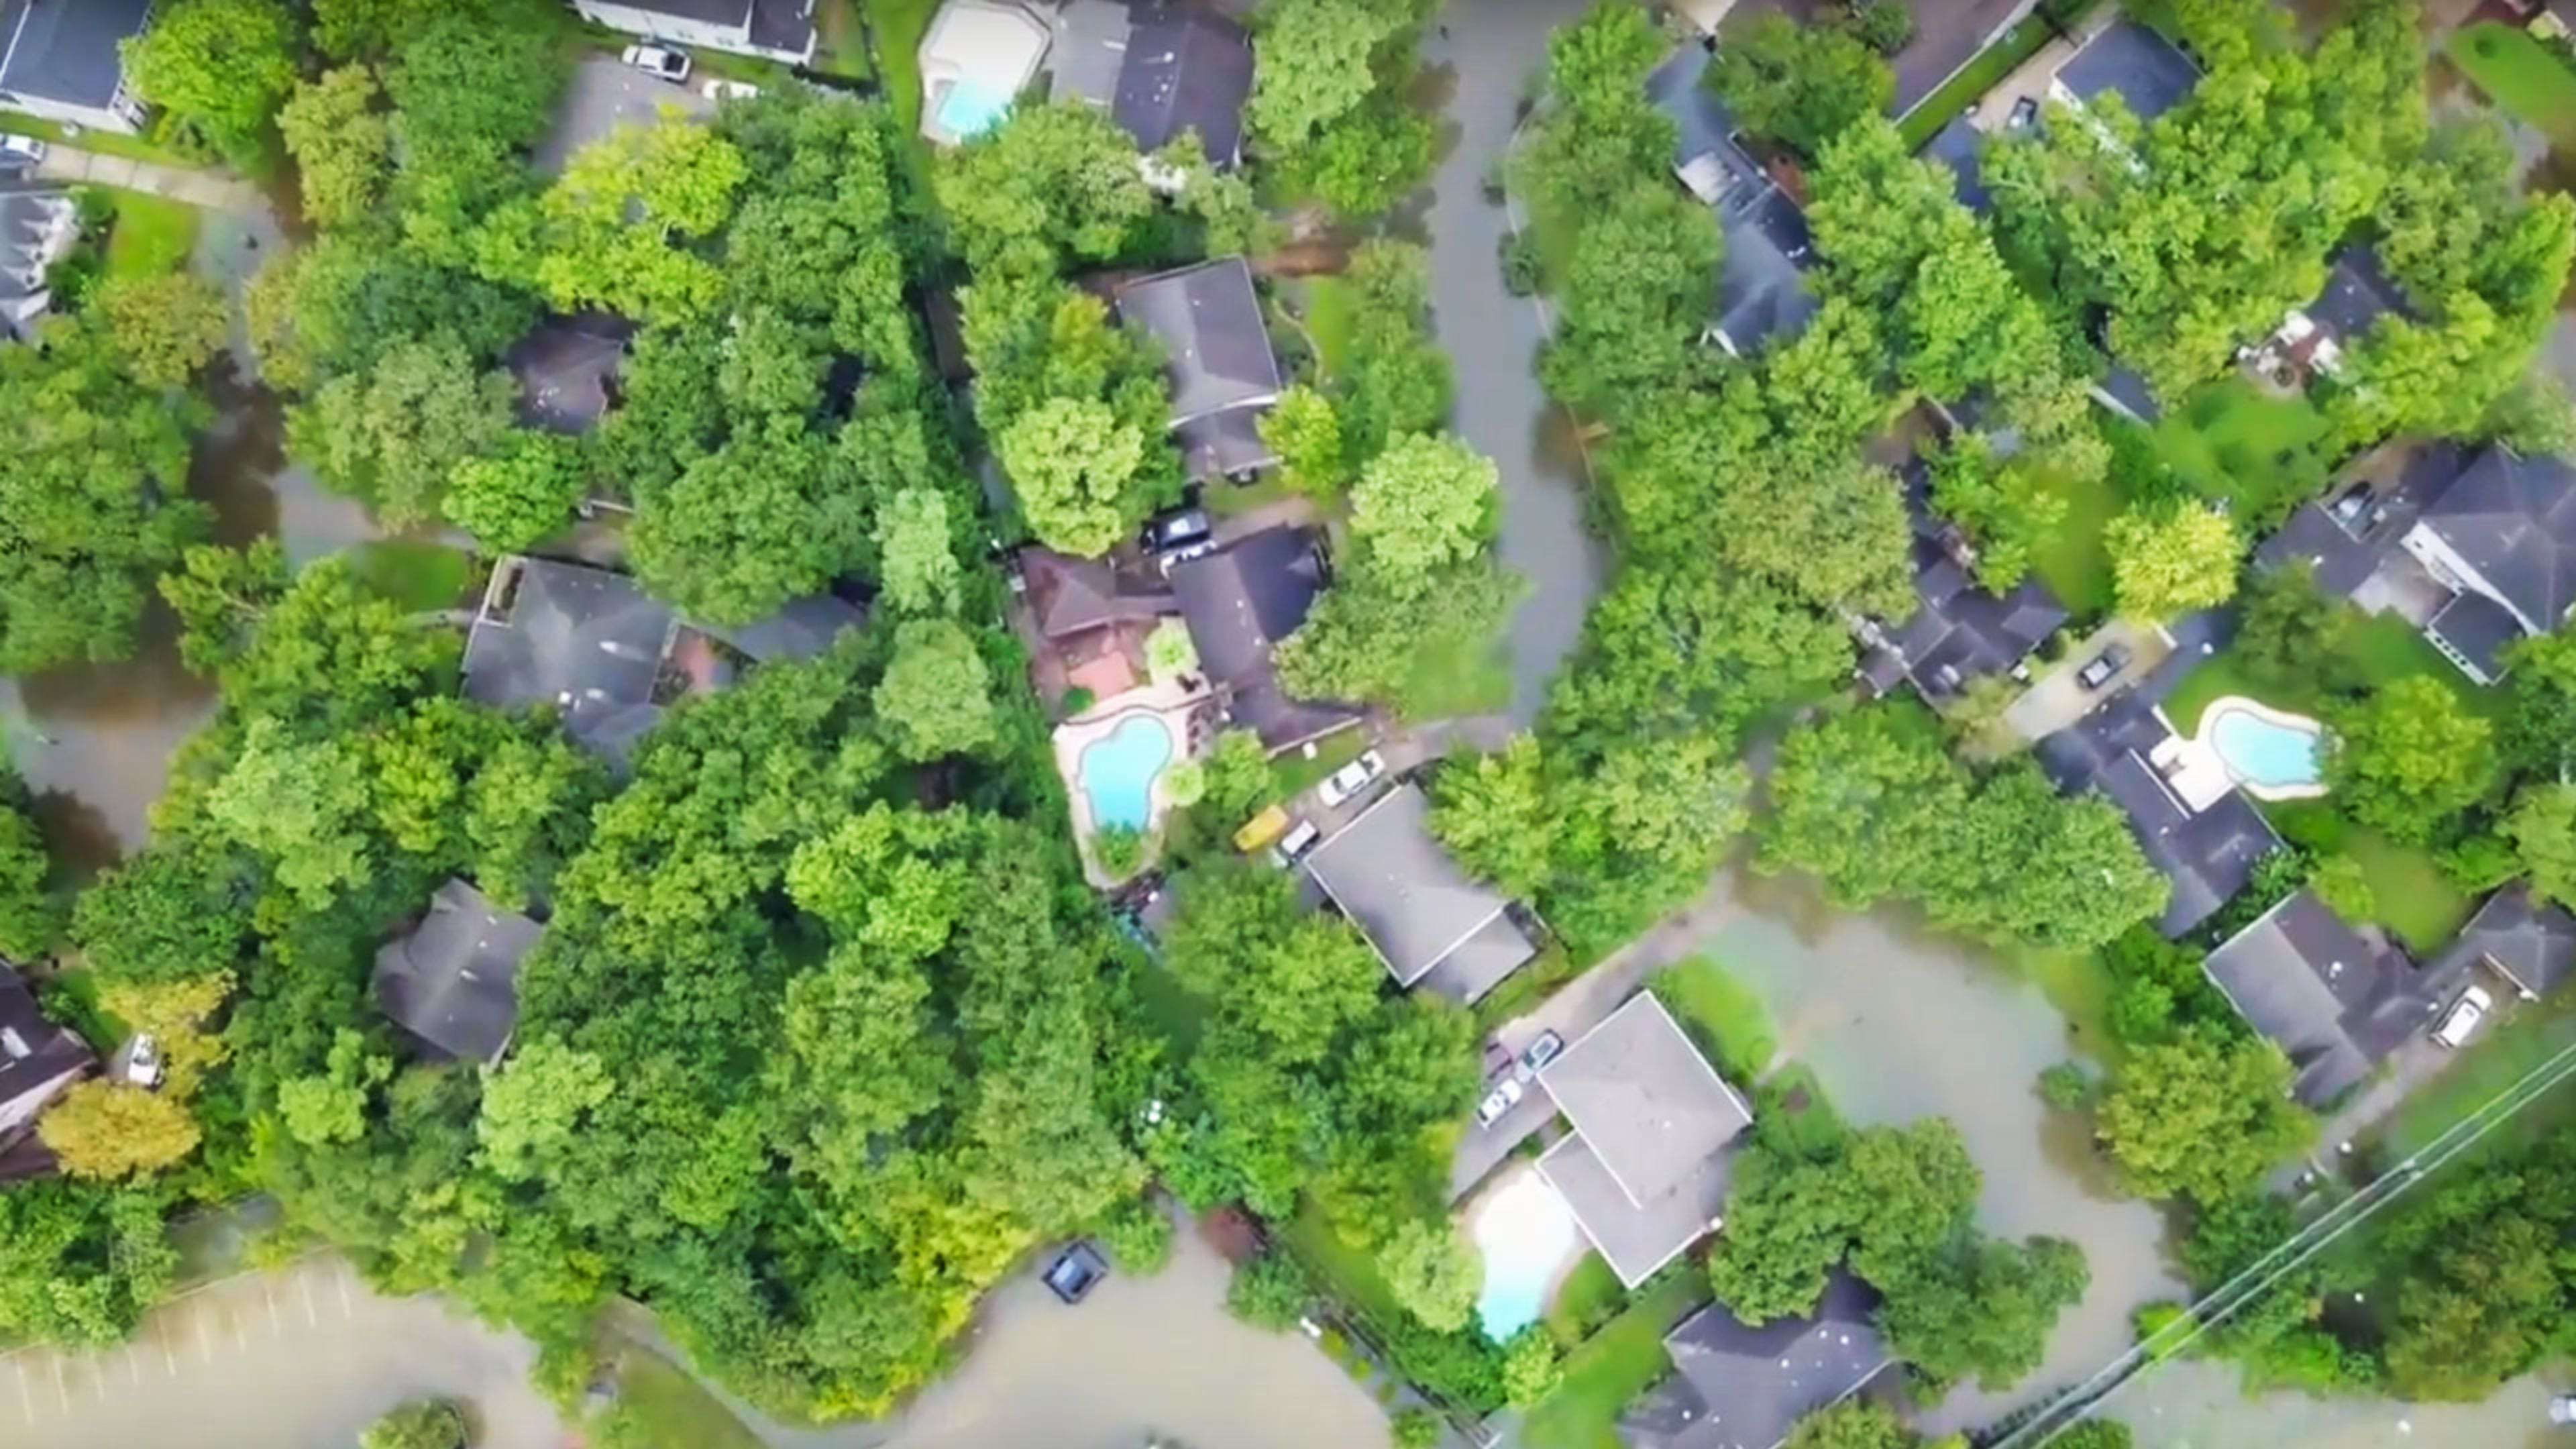 These drone videos over Houston show Harvey’s devastating floods: “Beyond anything experienced”